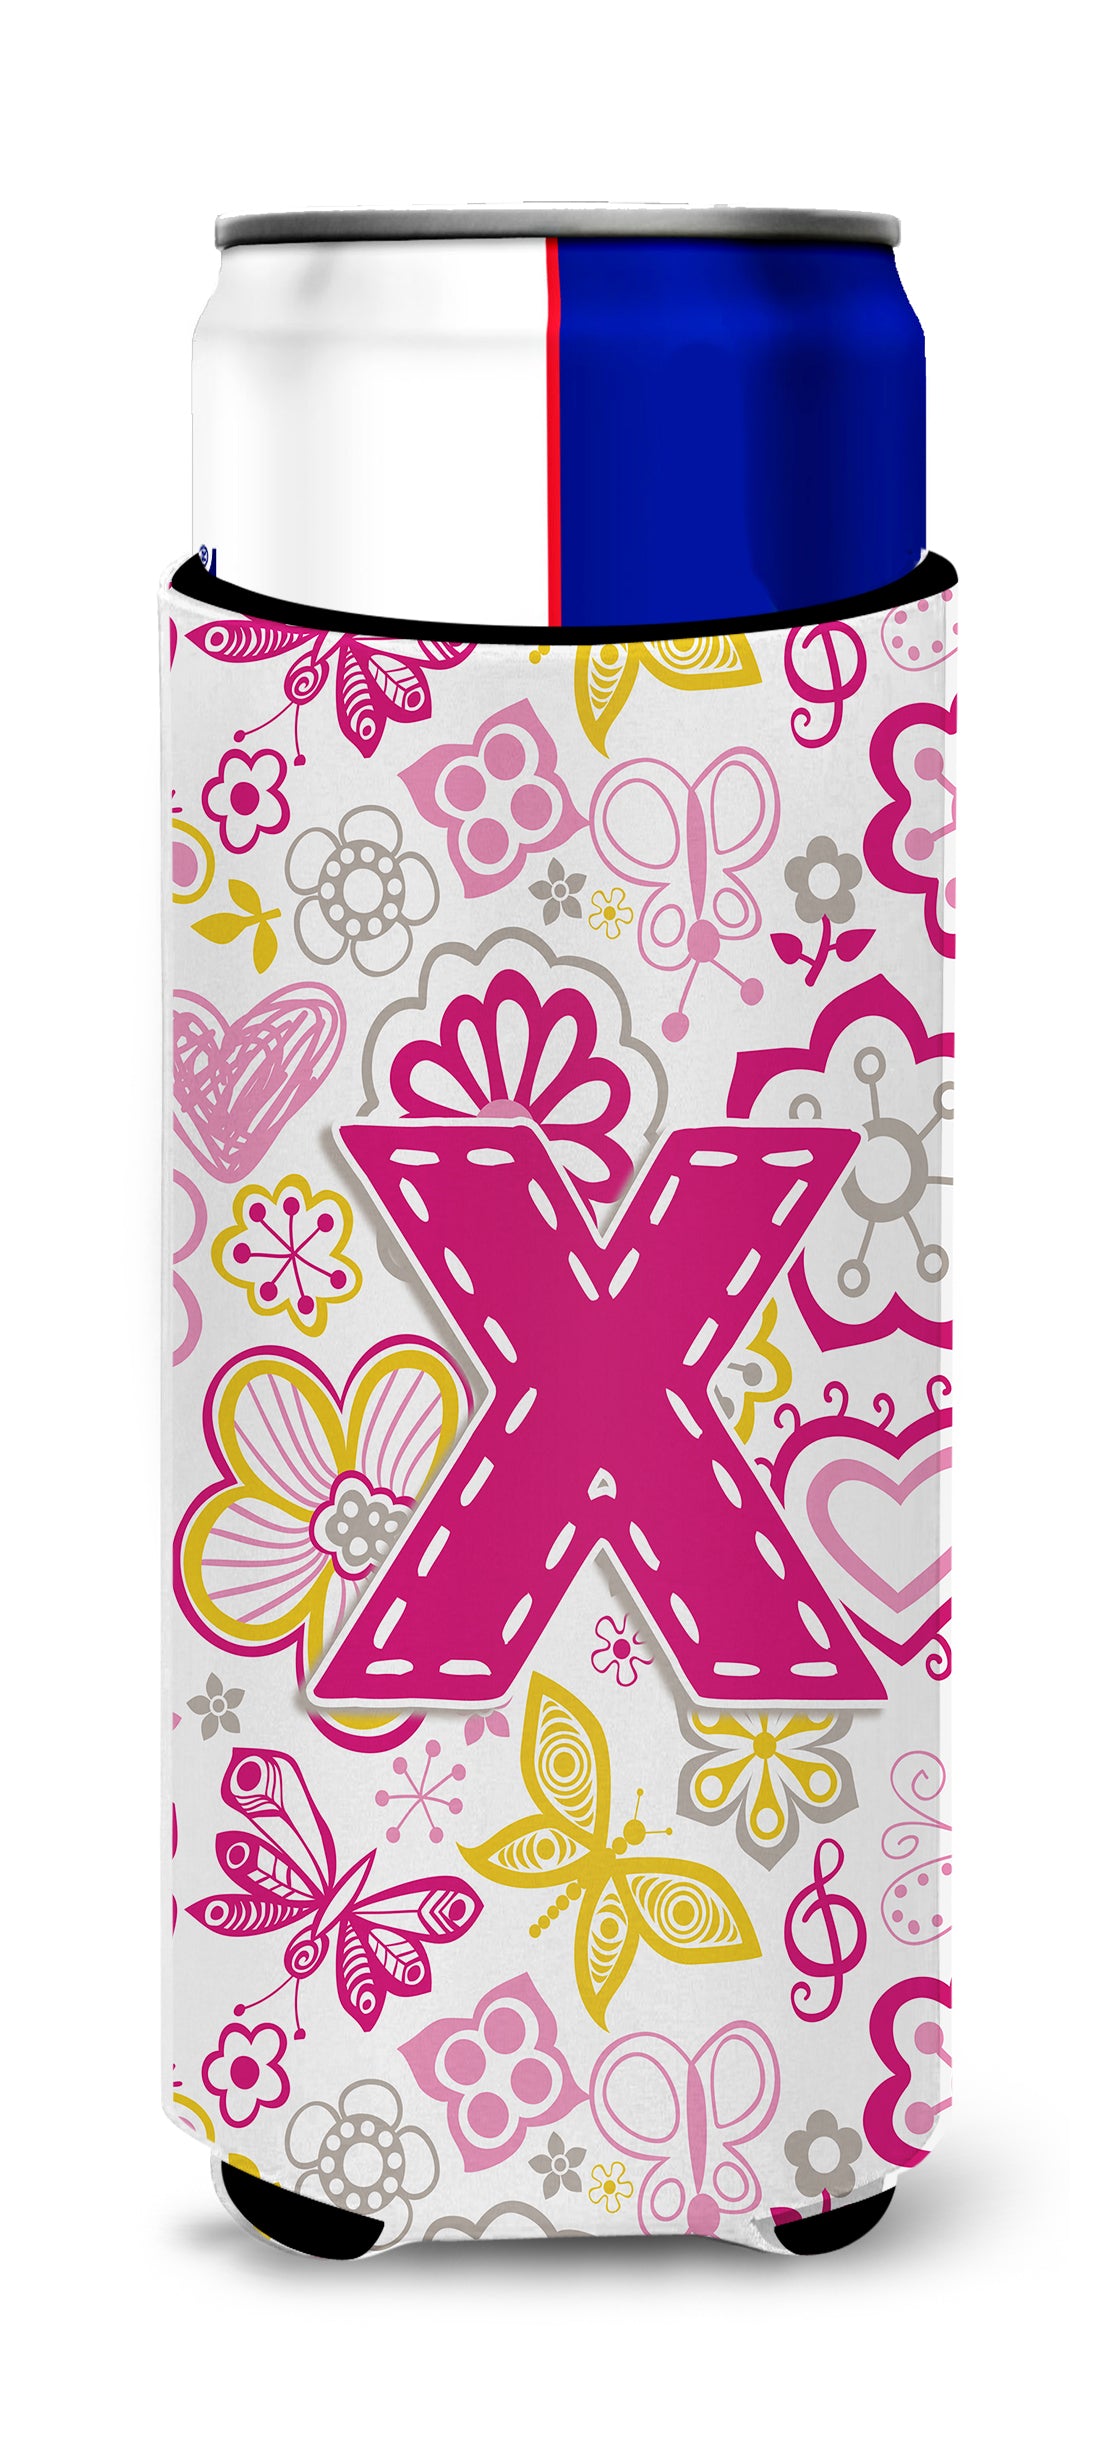 Letter X Flowers and Butterflies Pink Ultra Beverage Insulators for slim cans CJ2005-XMUK.